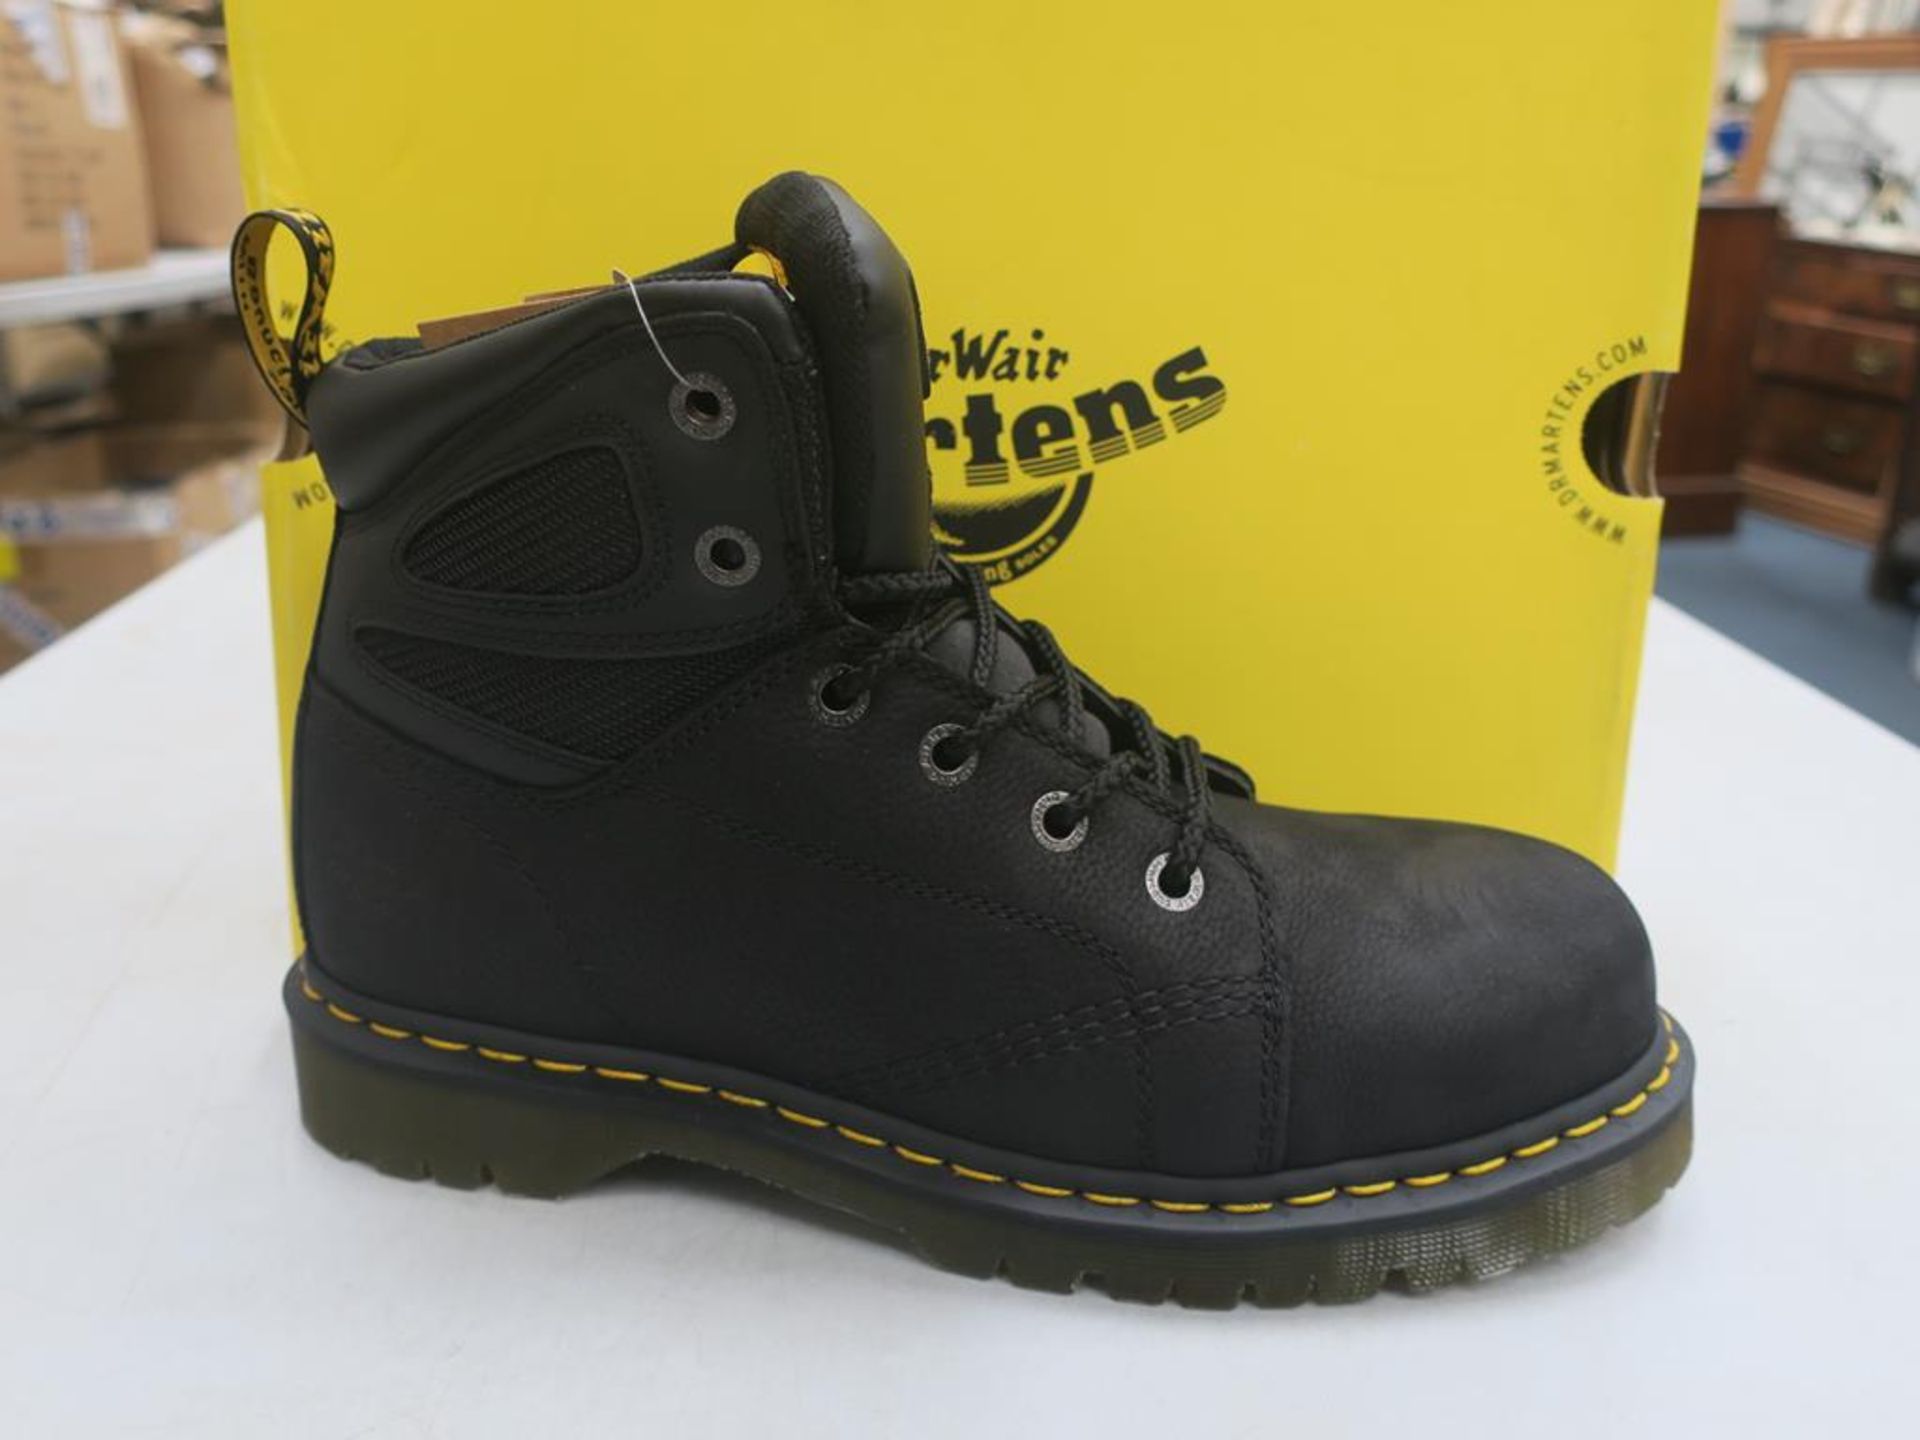 * A pair of New/Boxed Dr Martens Boots, Fairleigh St, 21046001 Overlord in black, UK size 10